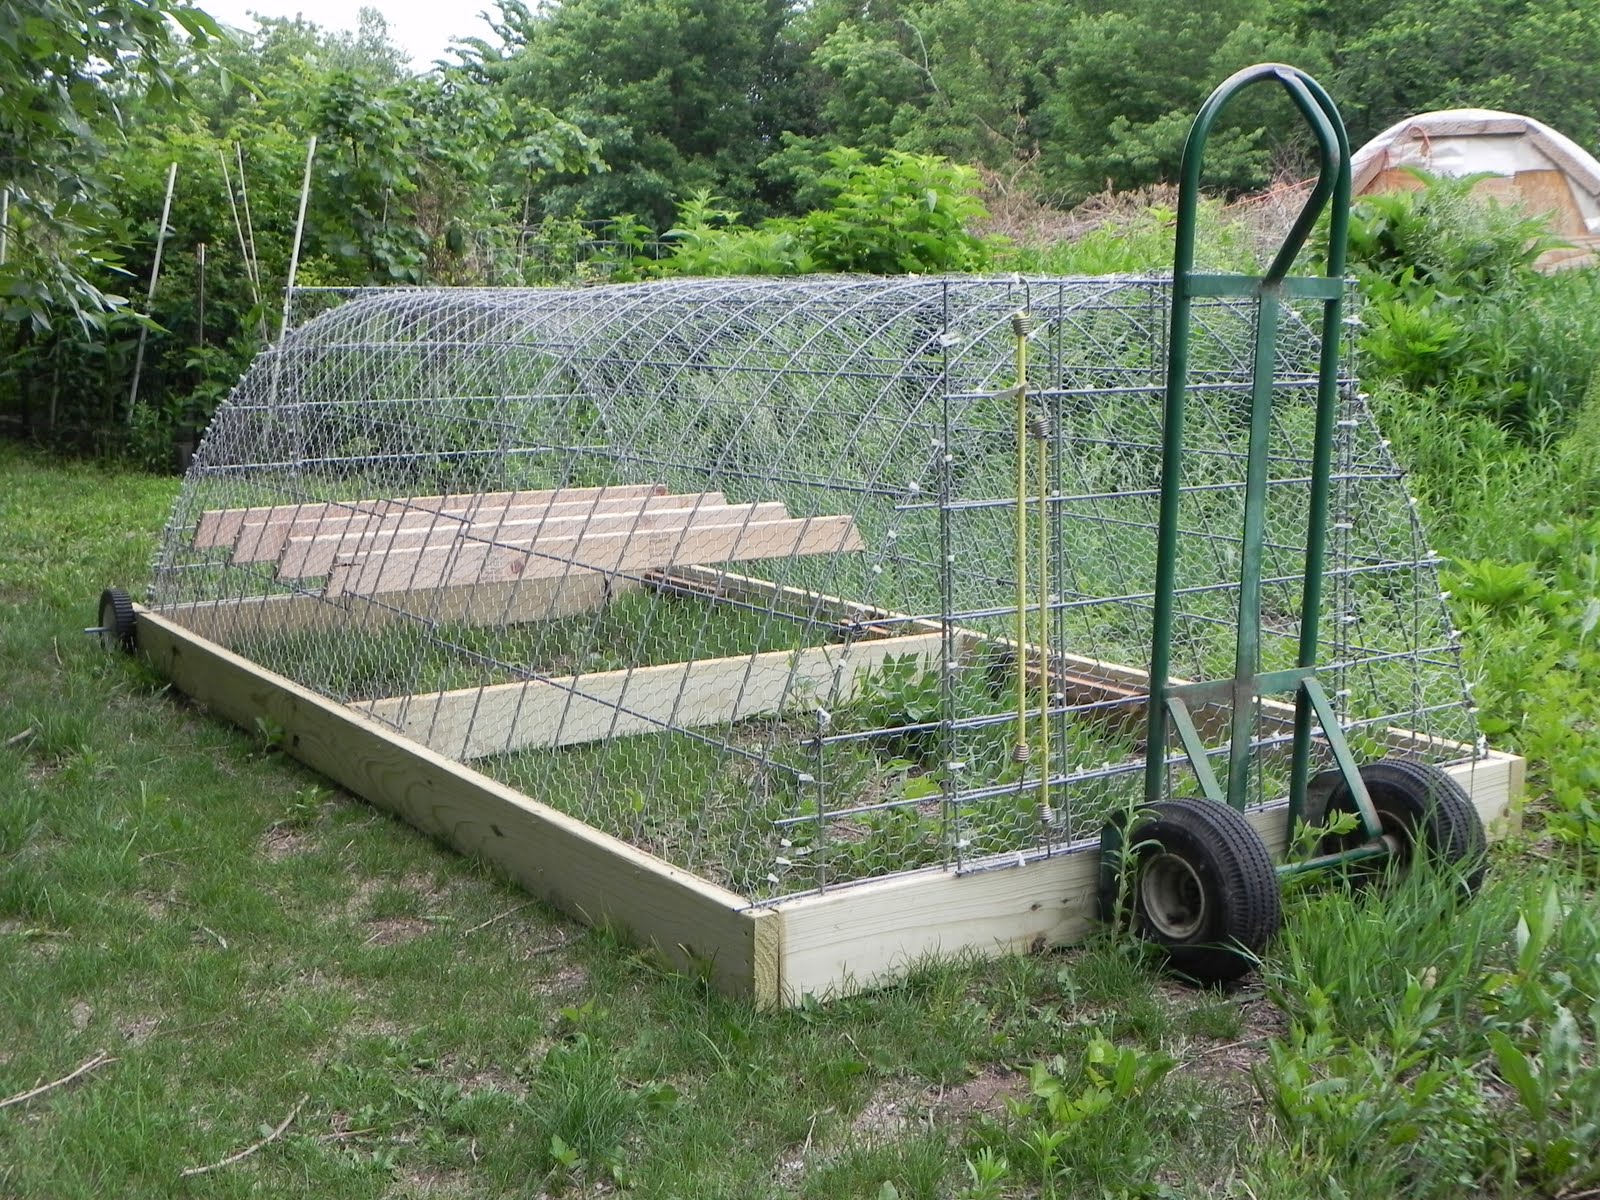 Curious Naturalist: The Chicken Tractor